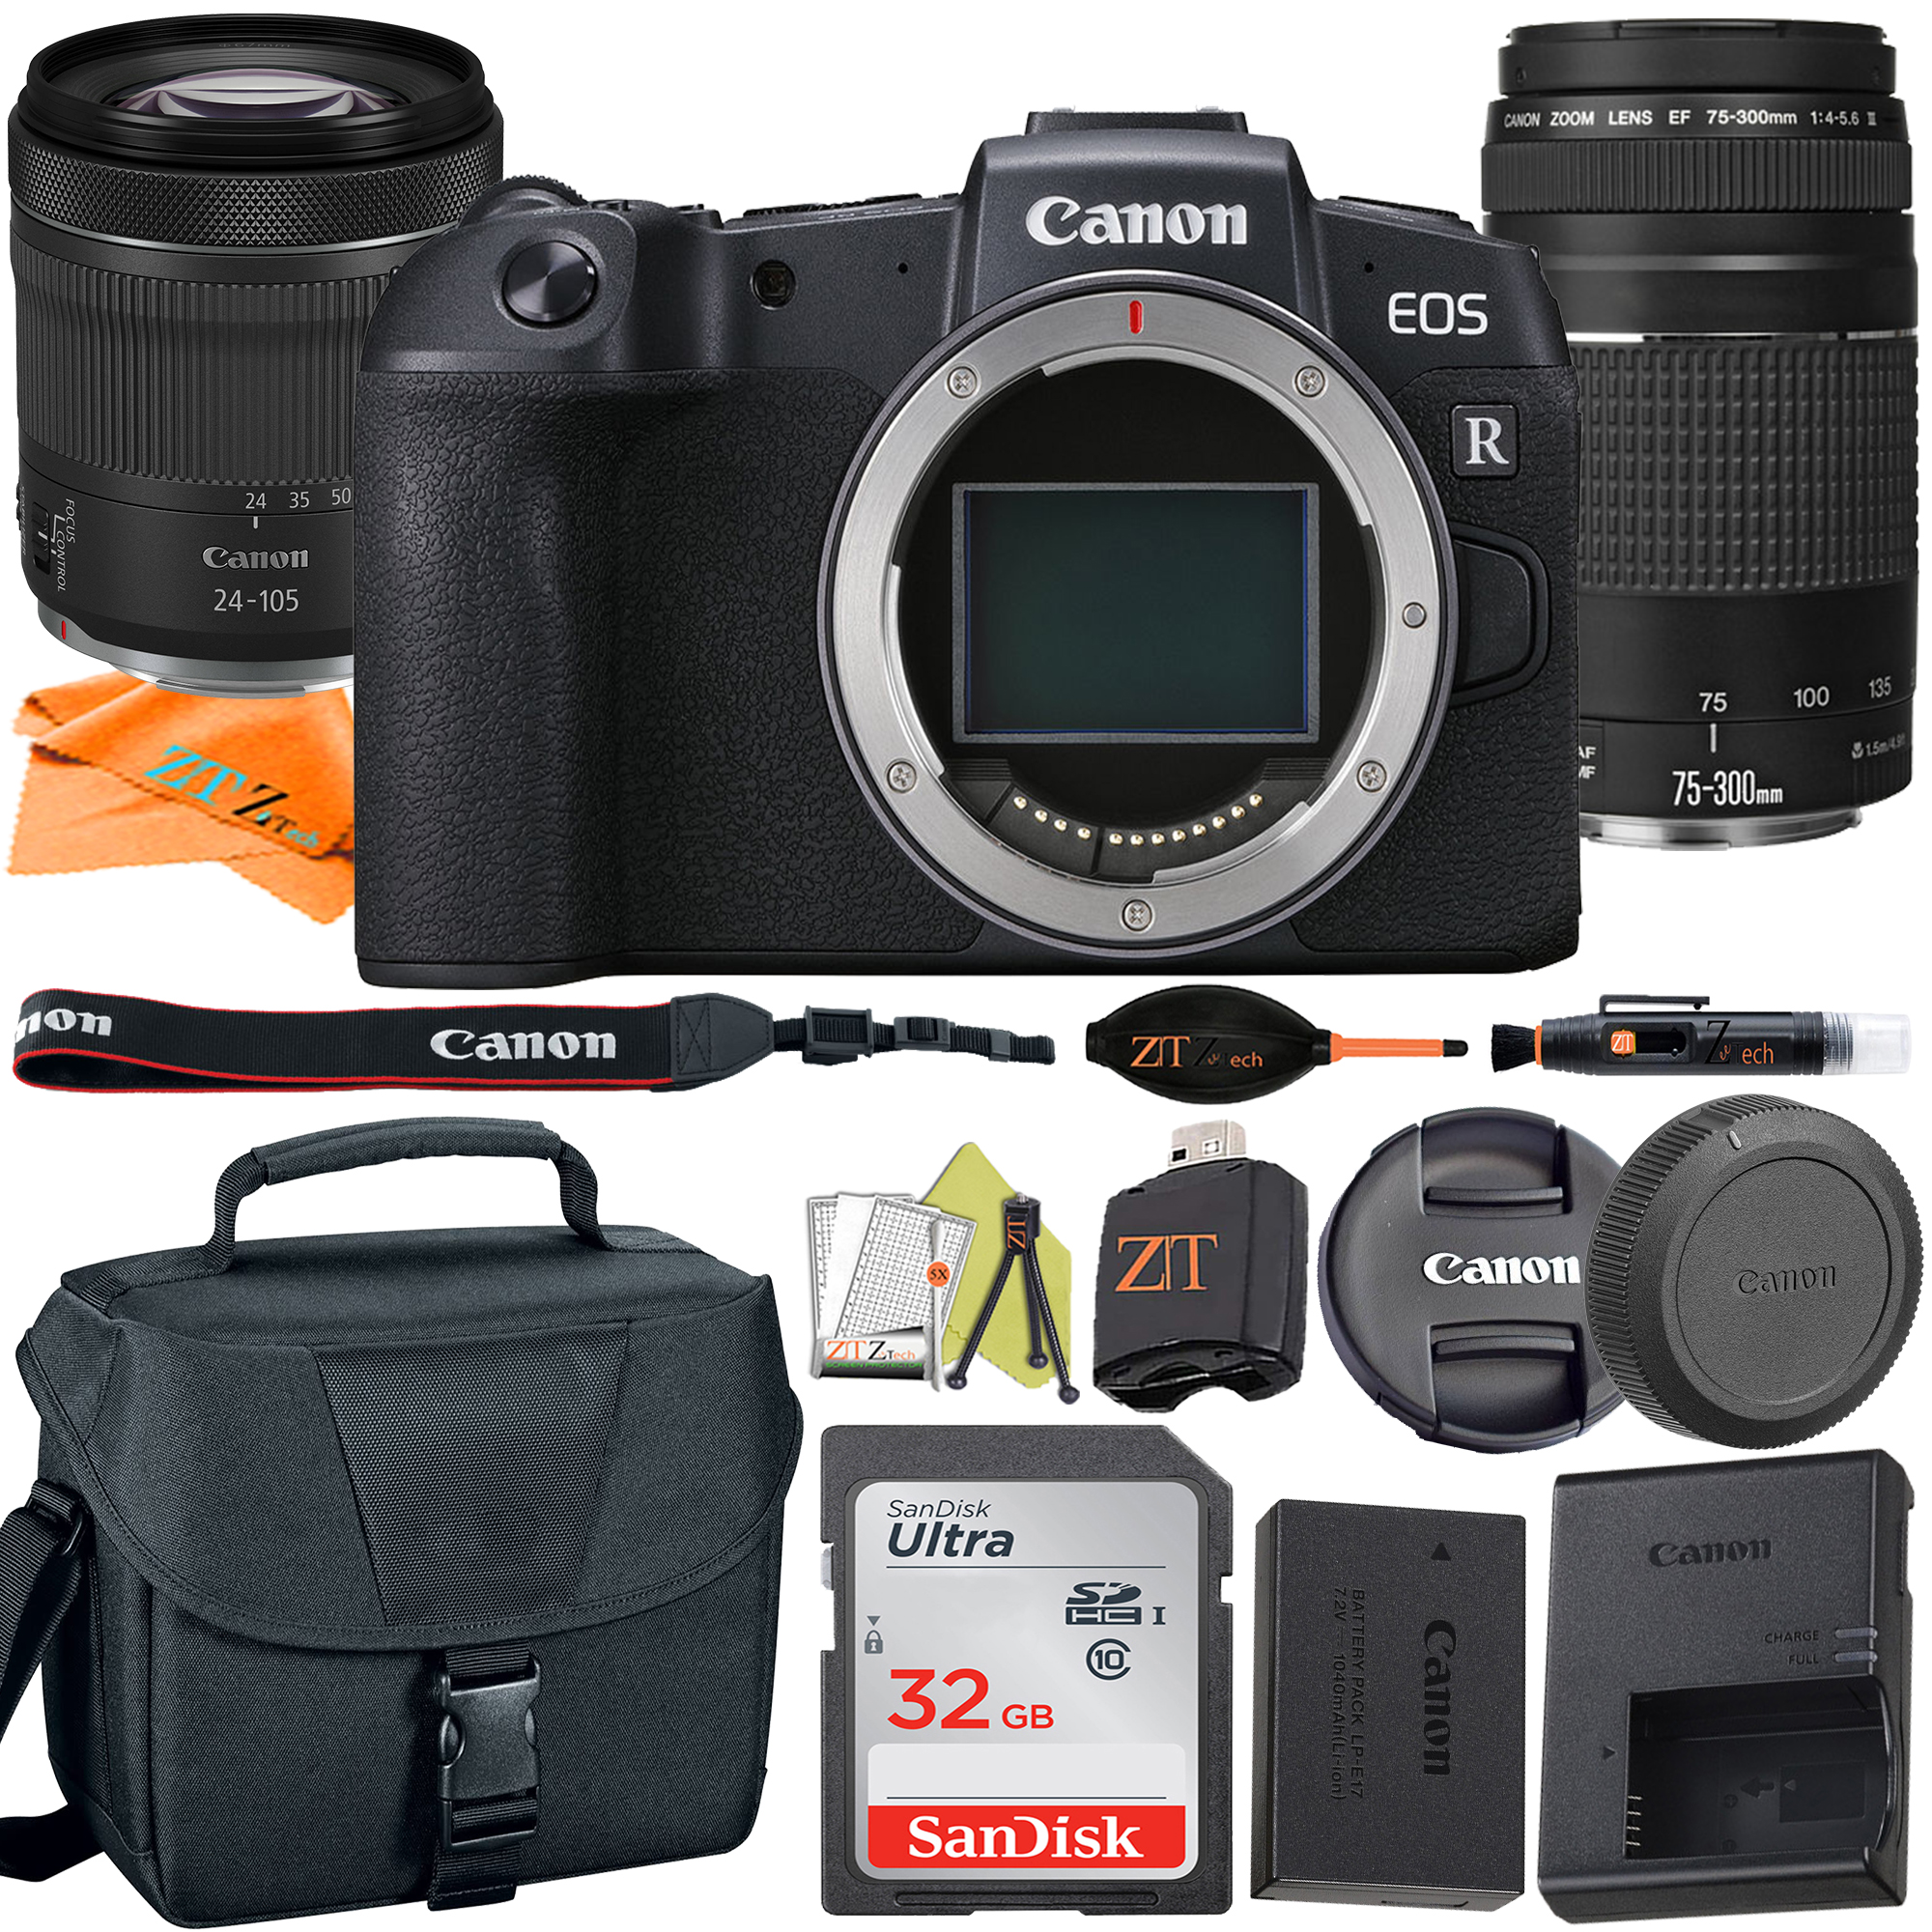 Canon EOS RP Mirrorless Digital Camera with RF24-105mm STM + 75-300mm Lens + SanDisk 32GB + Case + ZeeTech Accessory